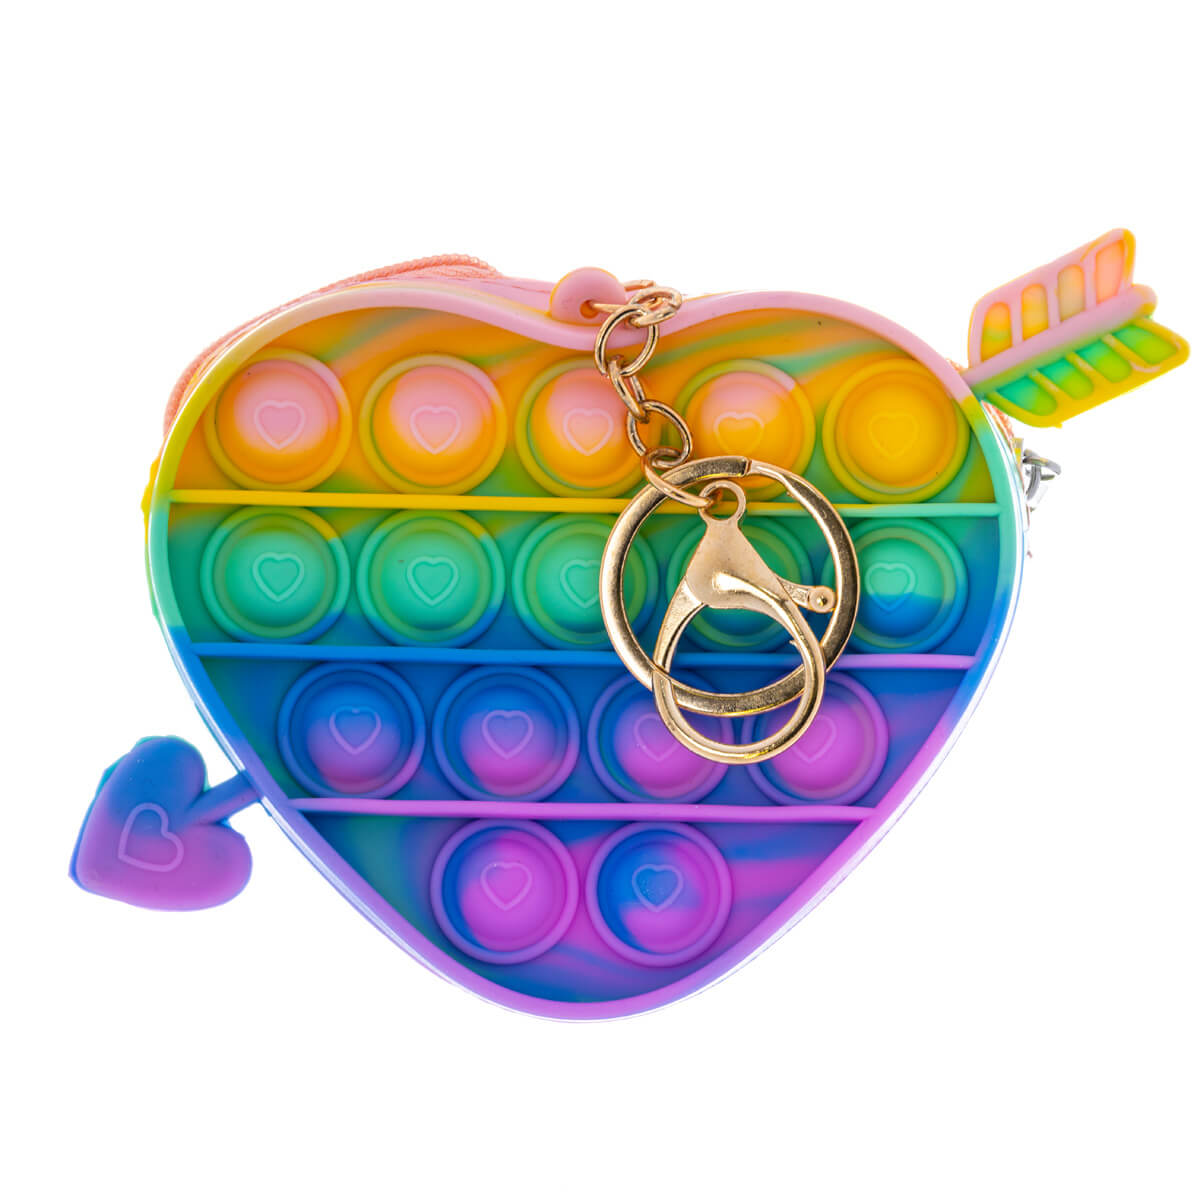 Heart pop it keychain and purse